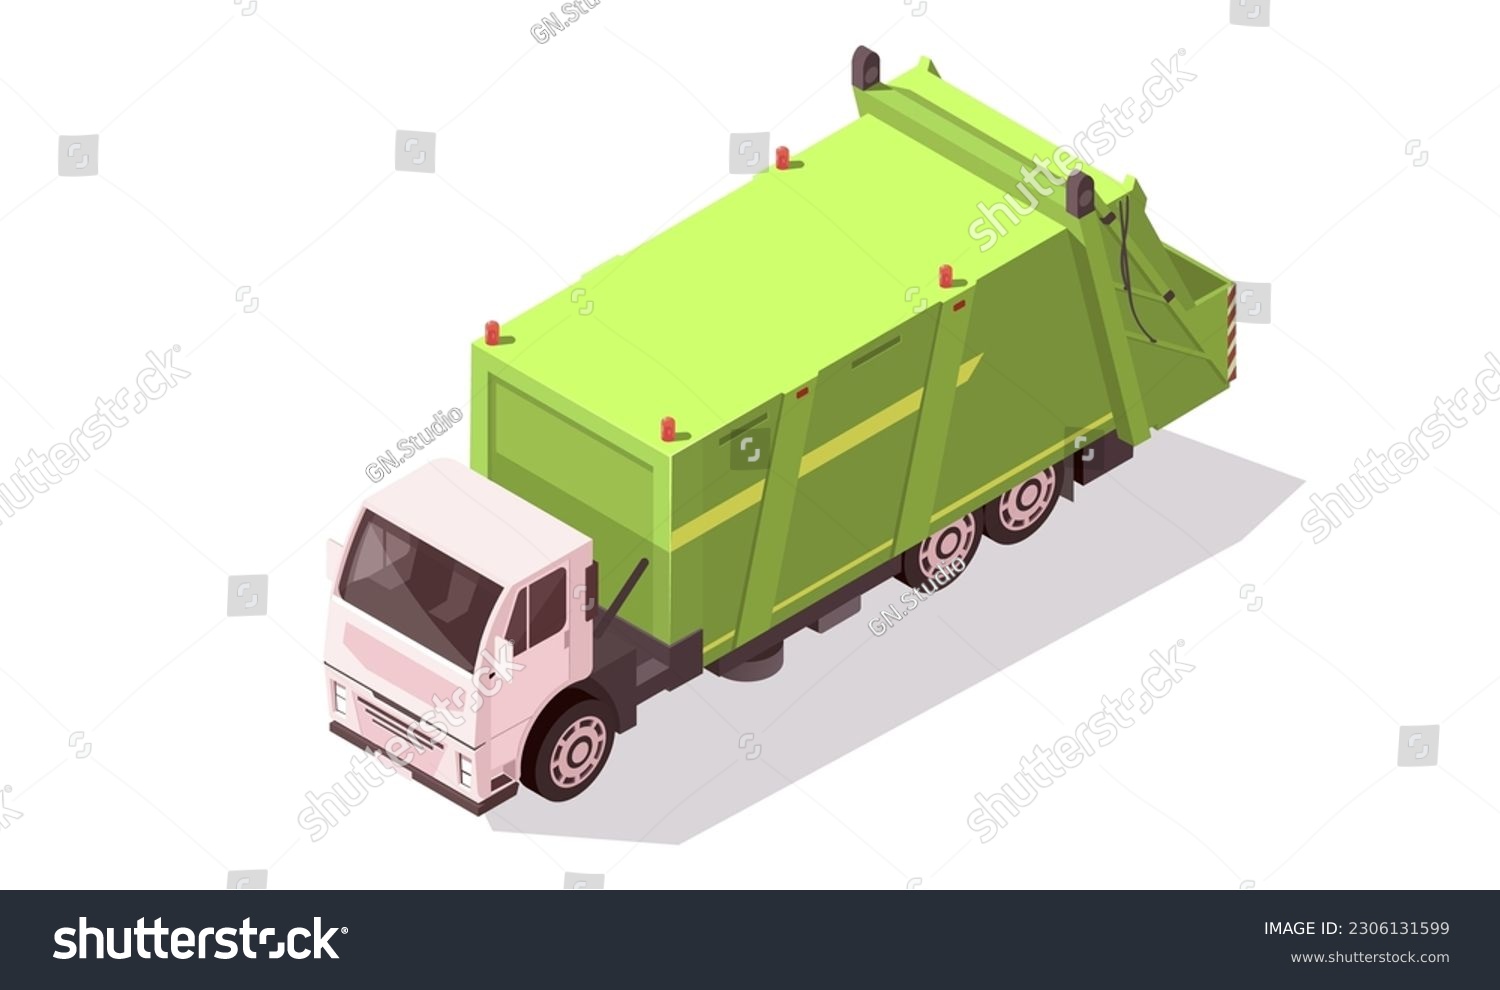 SVG of Green truck dumpster. Garbage recycling and utilization container vehicle. City waste recycling concept with garbage truck. Urban utility transport. Municipal cleaning service. Vector illustration svg